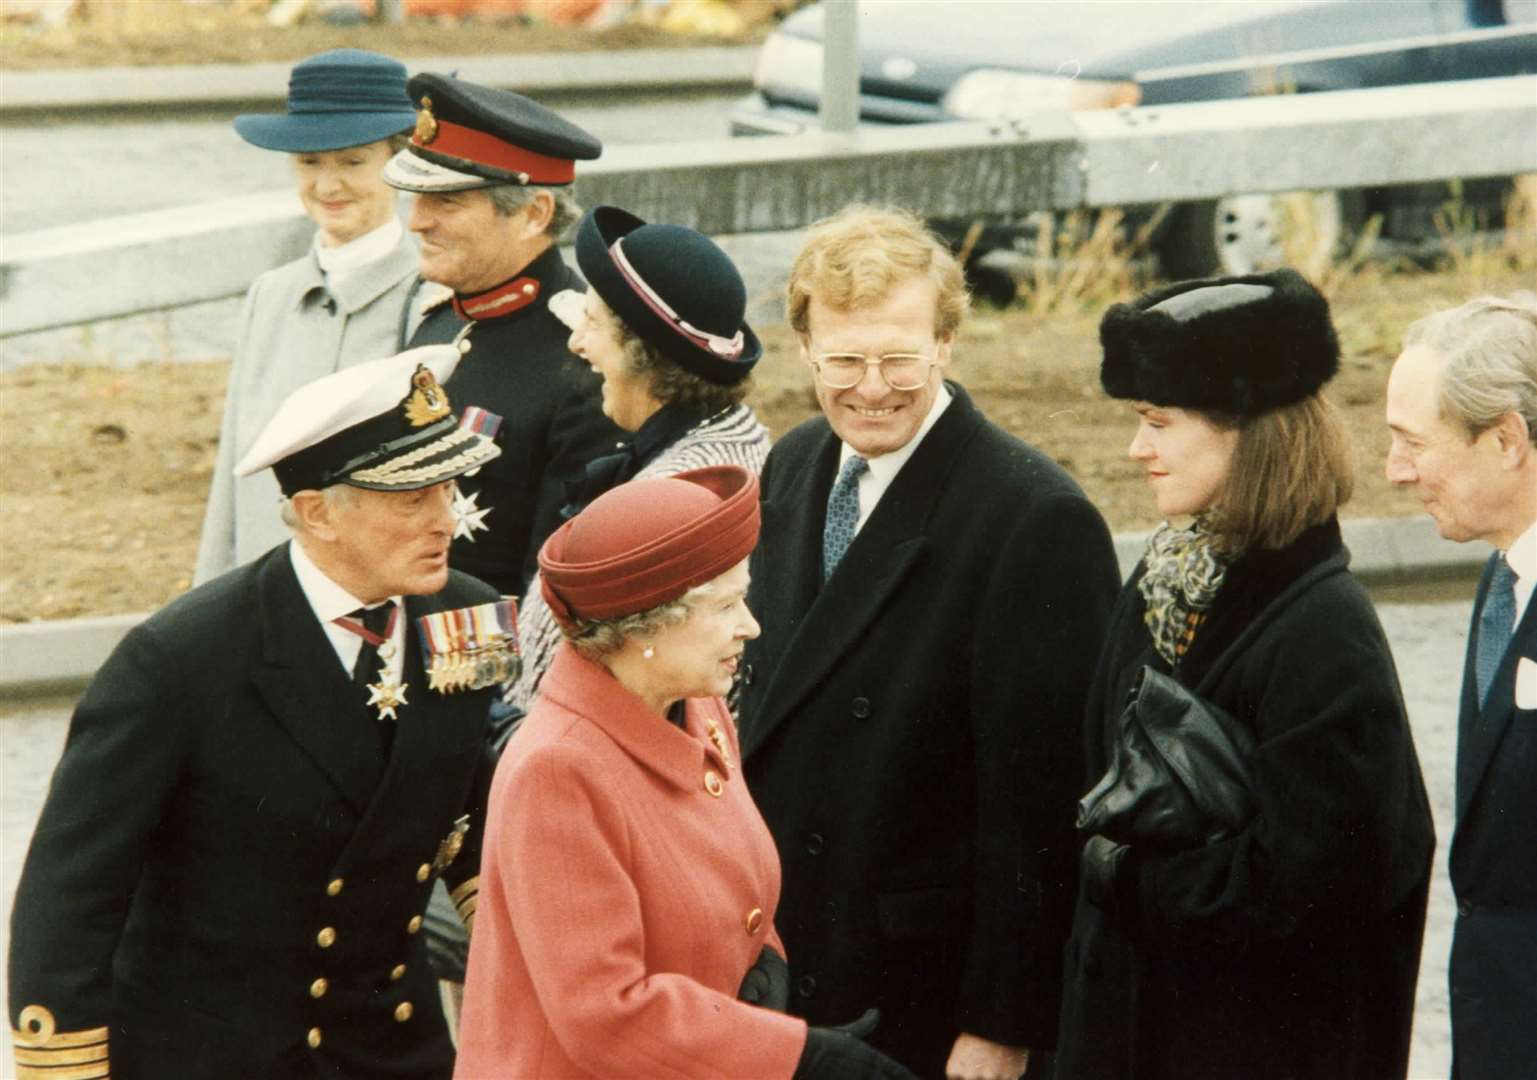 The Queen at the opening in 1991